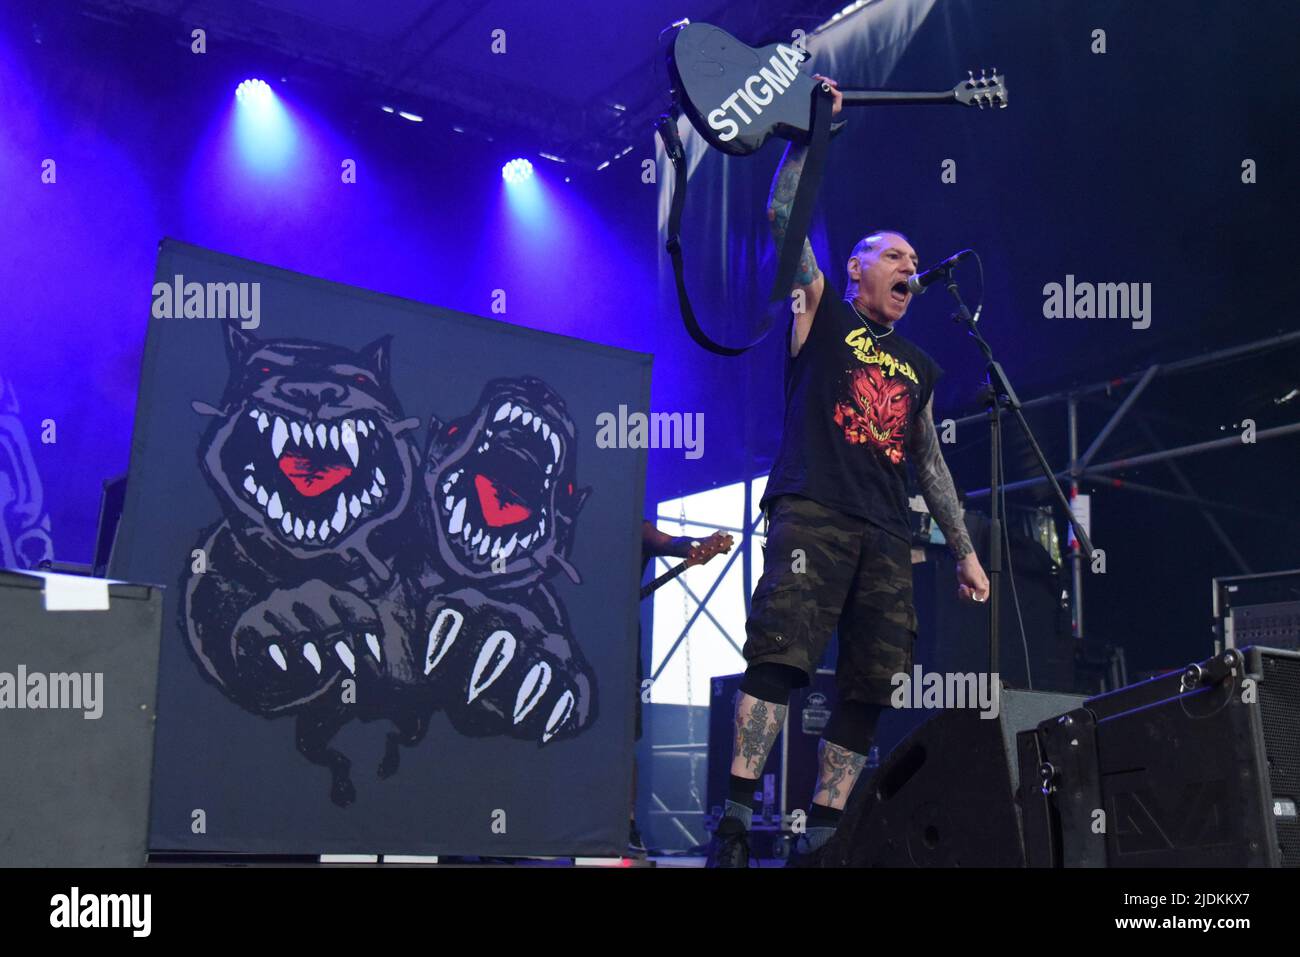 Padova, Italy. 21st June, 2022. Agnostic Front - Vinnie Stigma during The Rumjacks and Agnostic Front Opening Bad Religion, Music Concert in Padova, Italy, June 21 2022 Credit: Independent Photo Agency/Alamy Live News Stock Photo